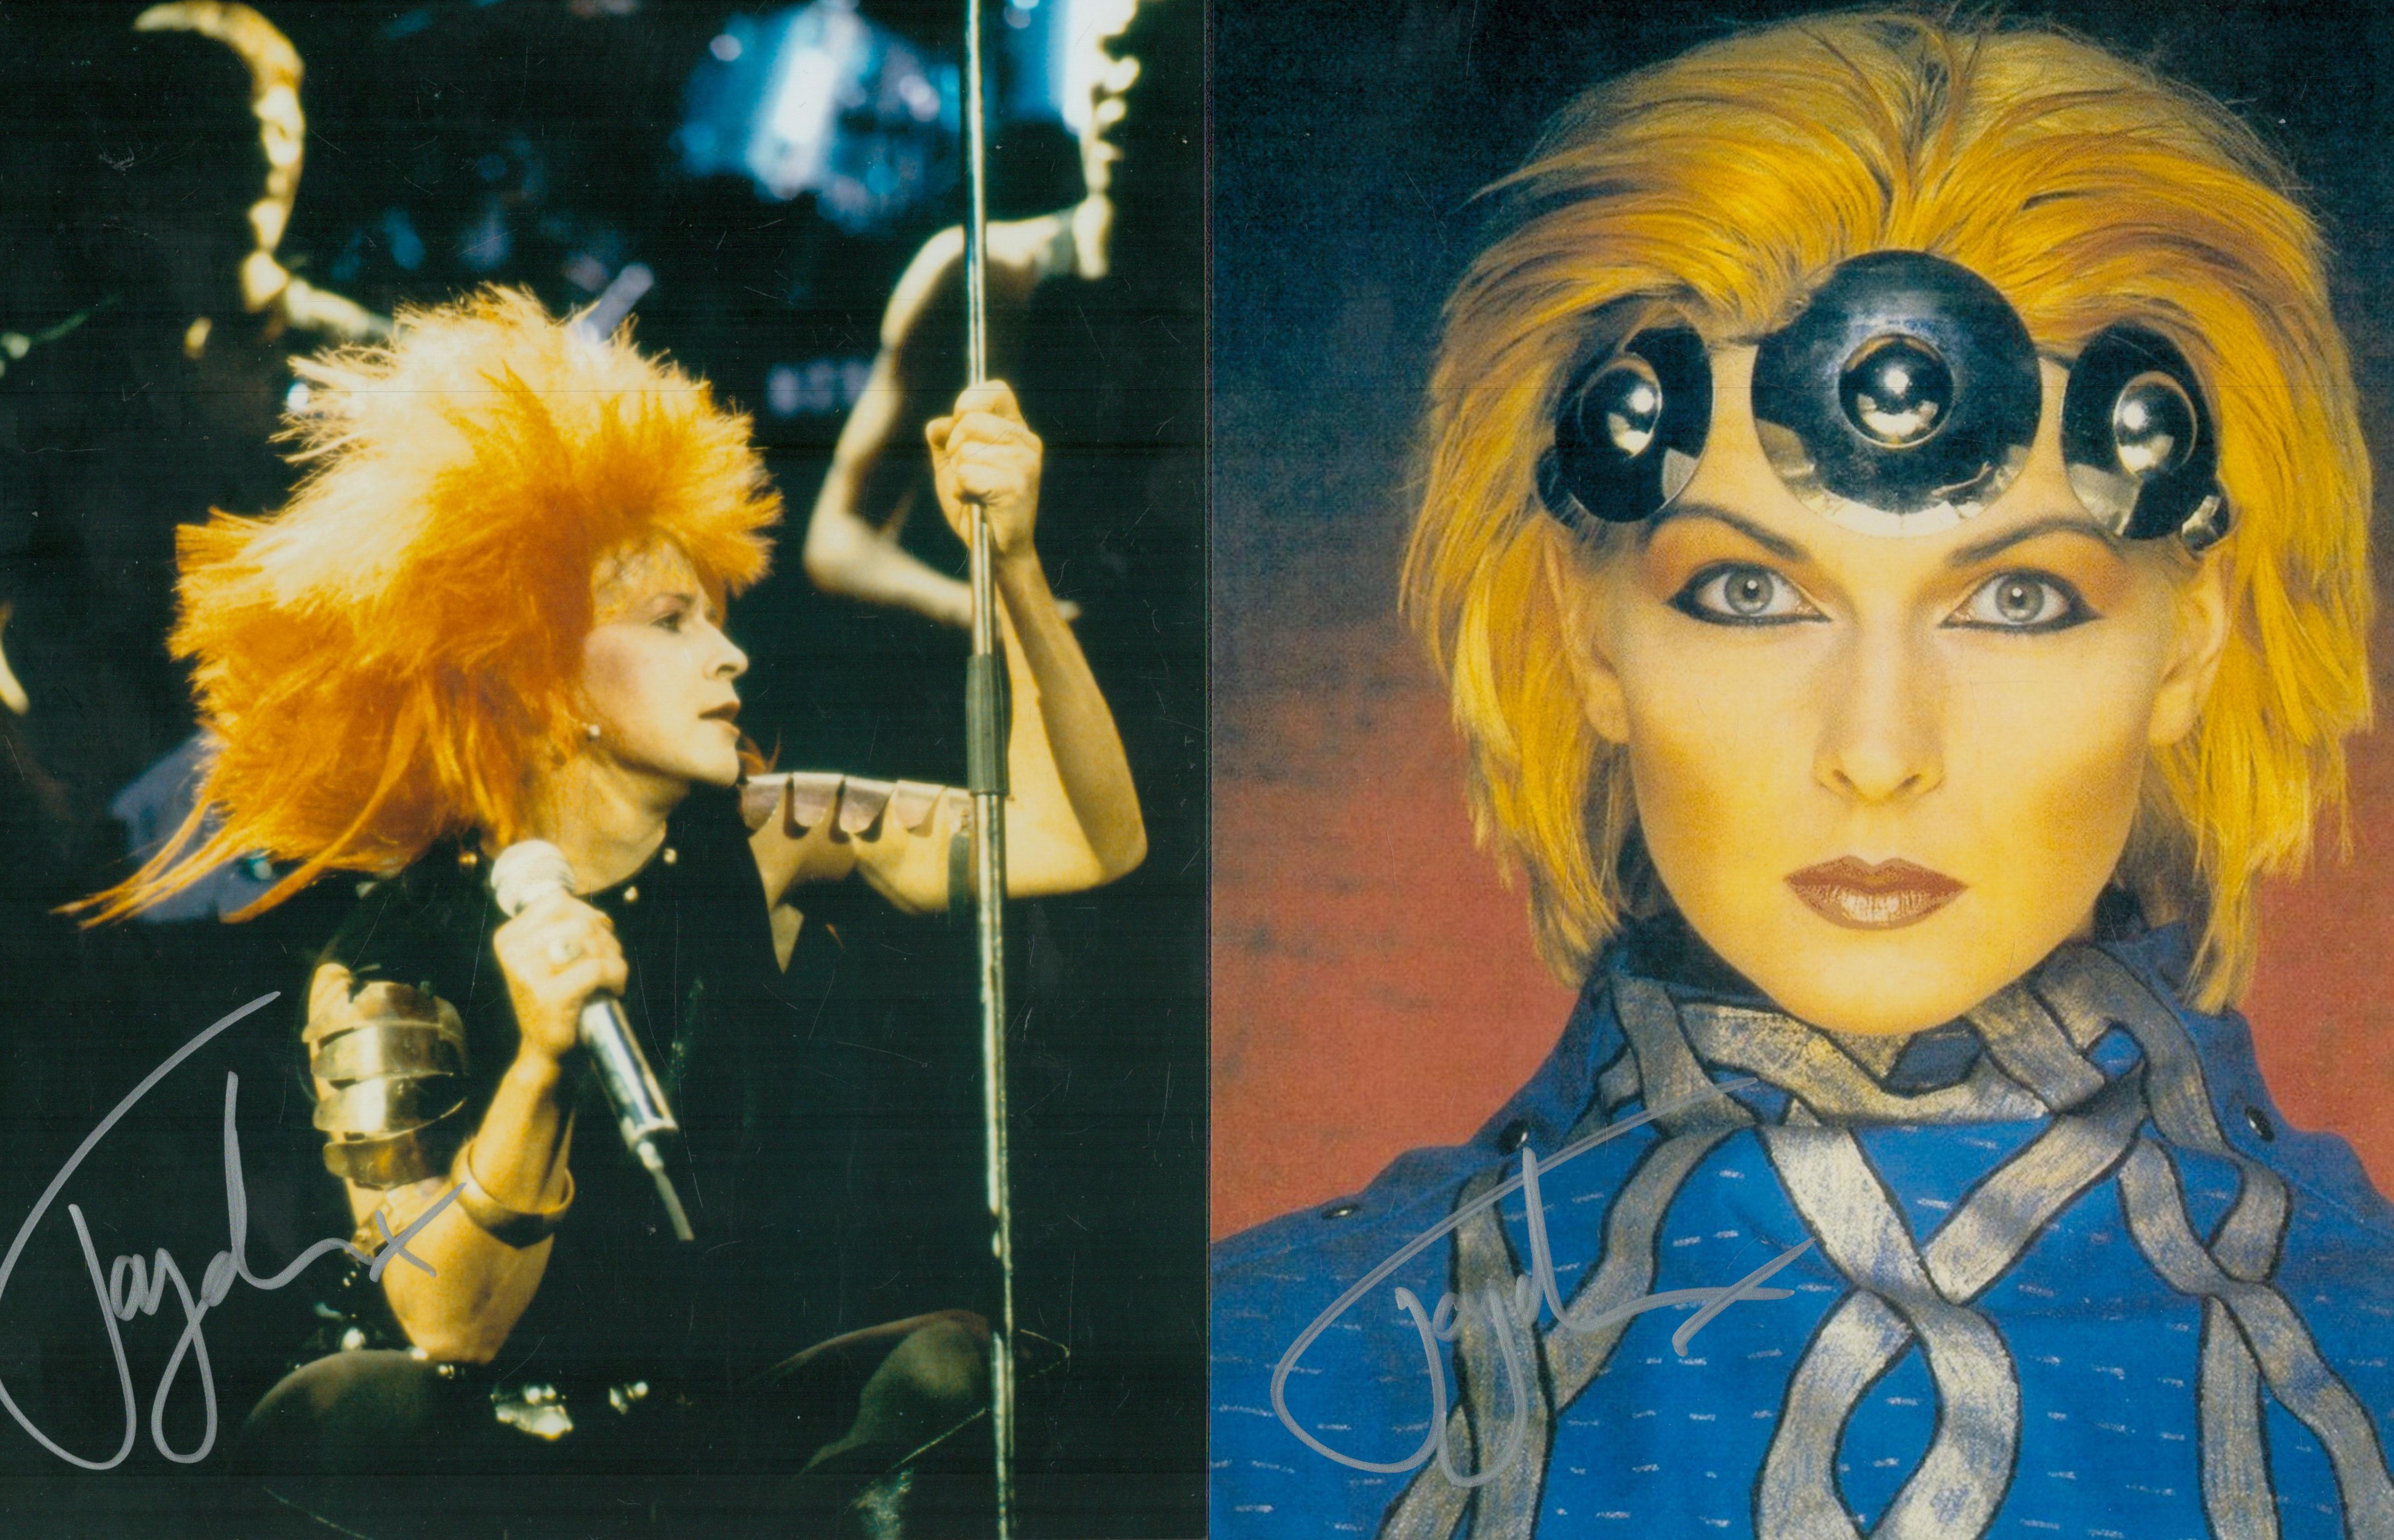 Music Toyah punk queen, three stunning signed 10 x 8 inch colour photos in fabulous outfits. Good